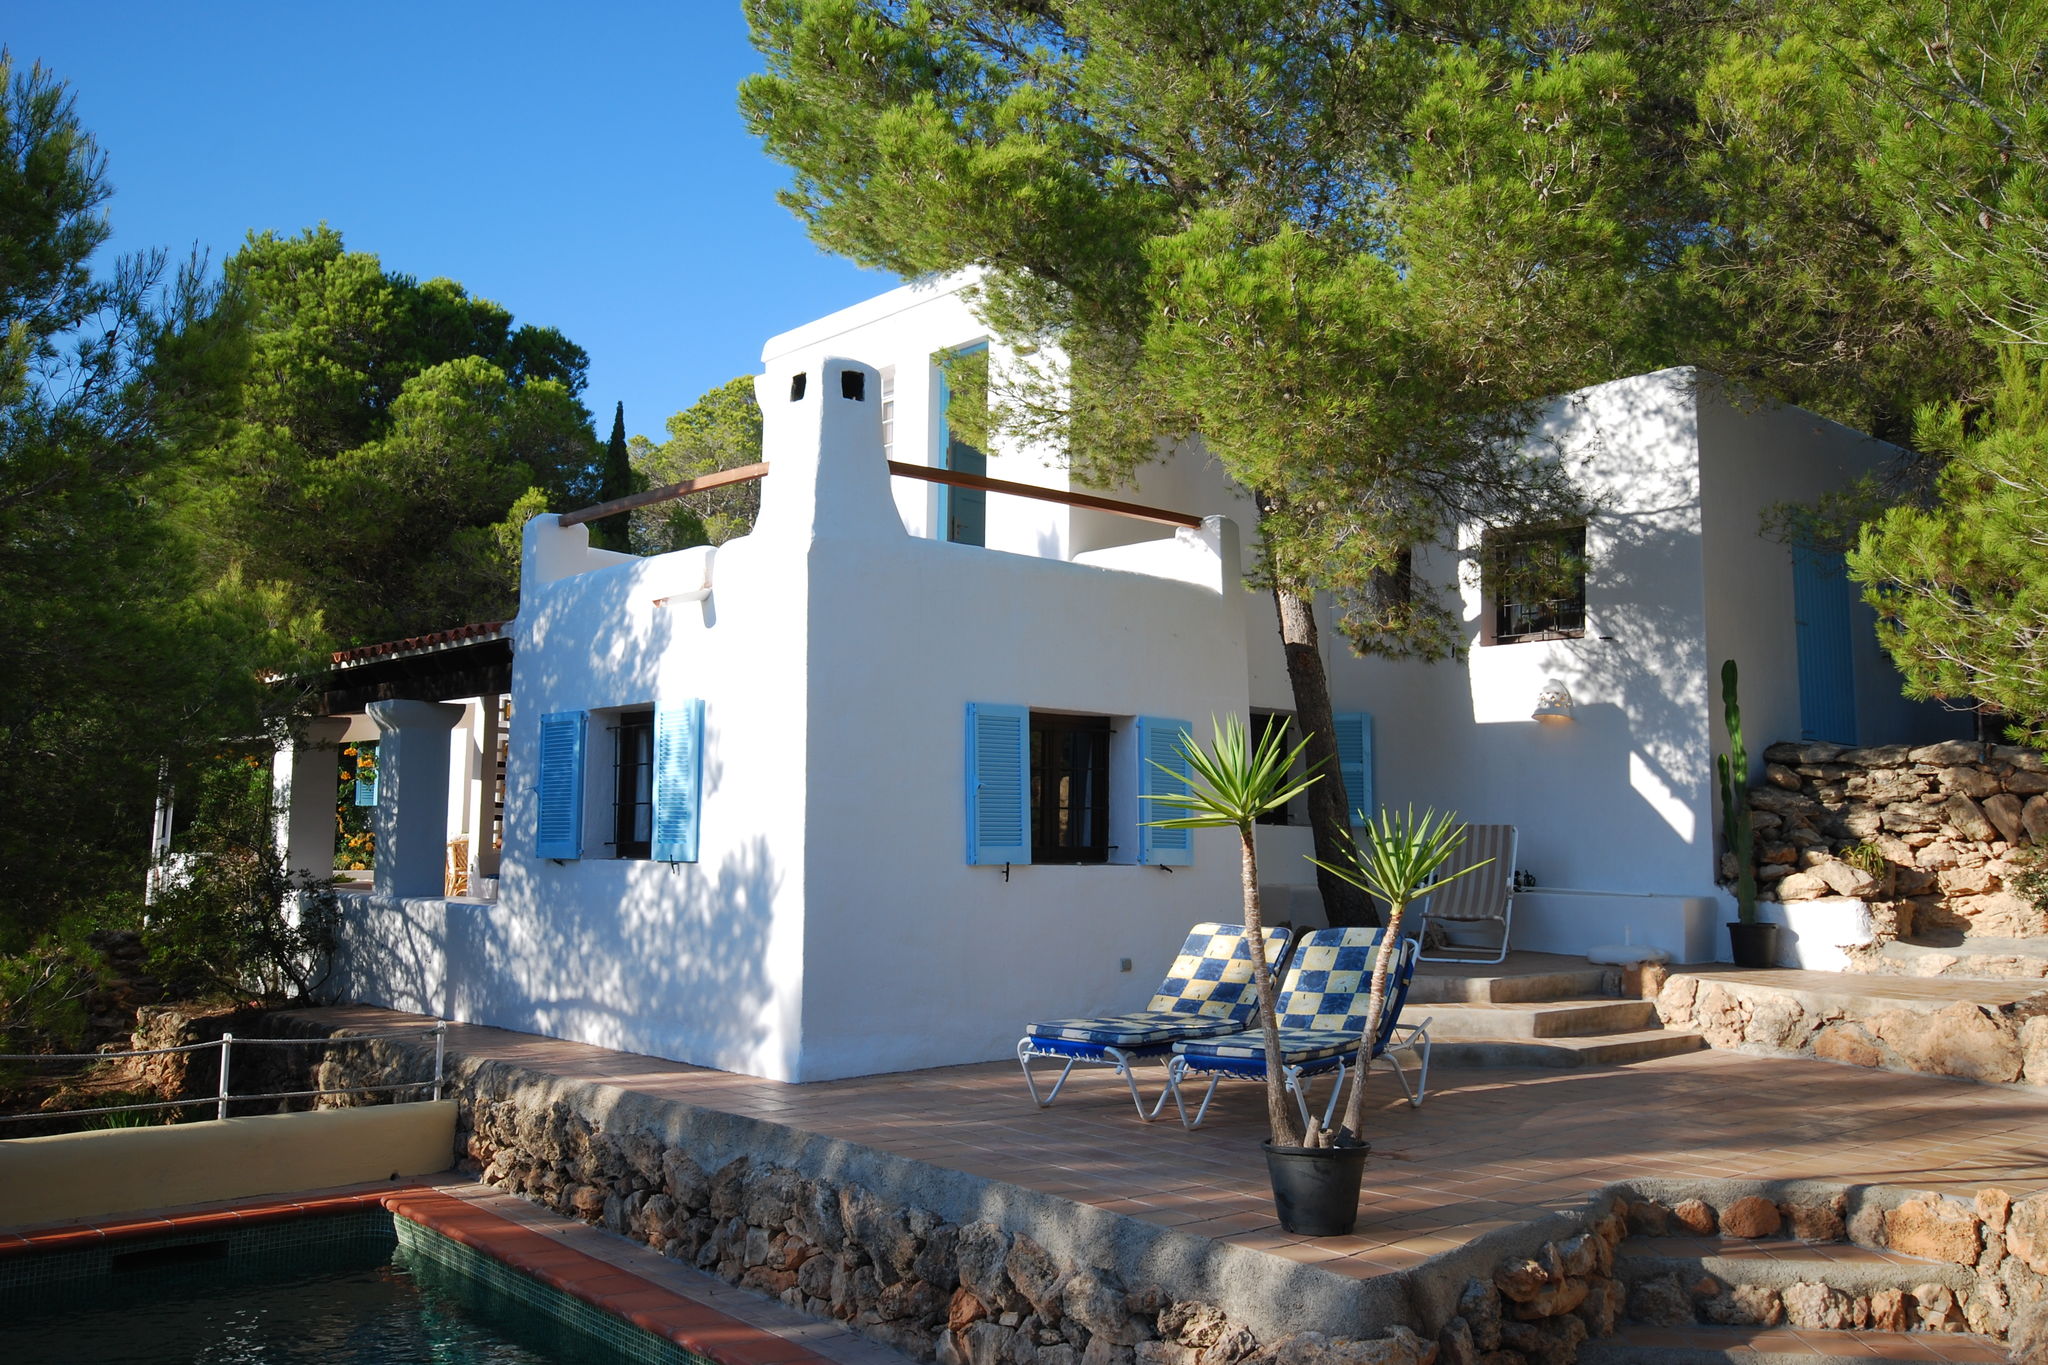 Holiday in Ibiza, nestled between green with private pool